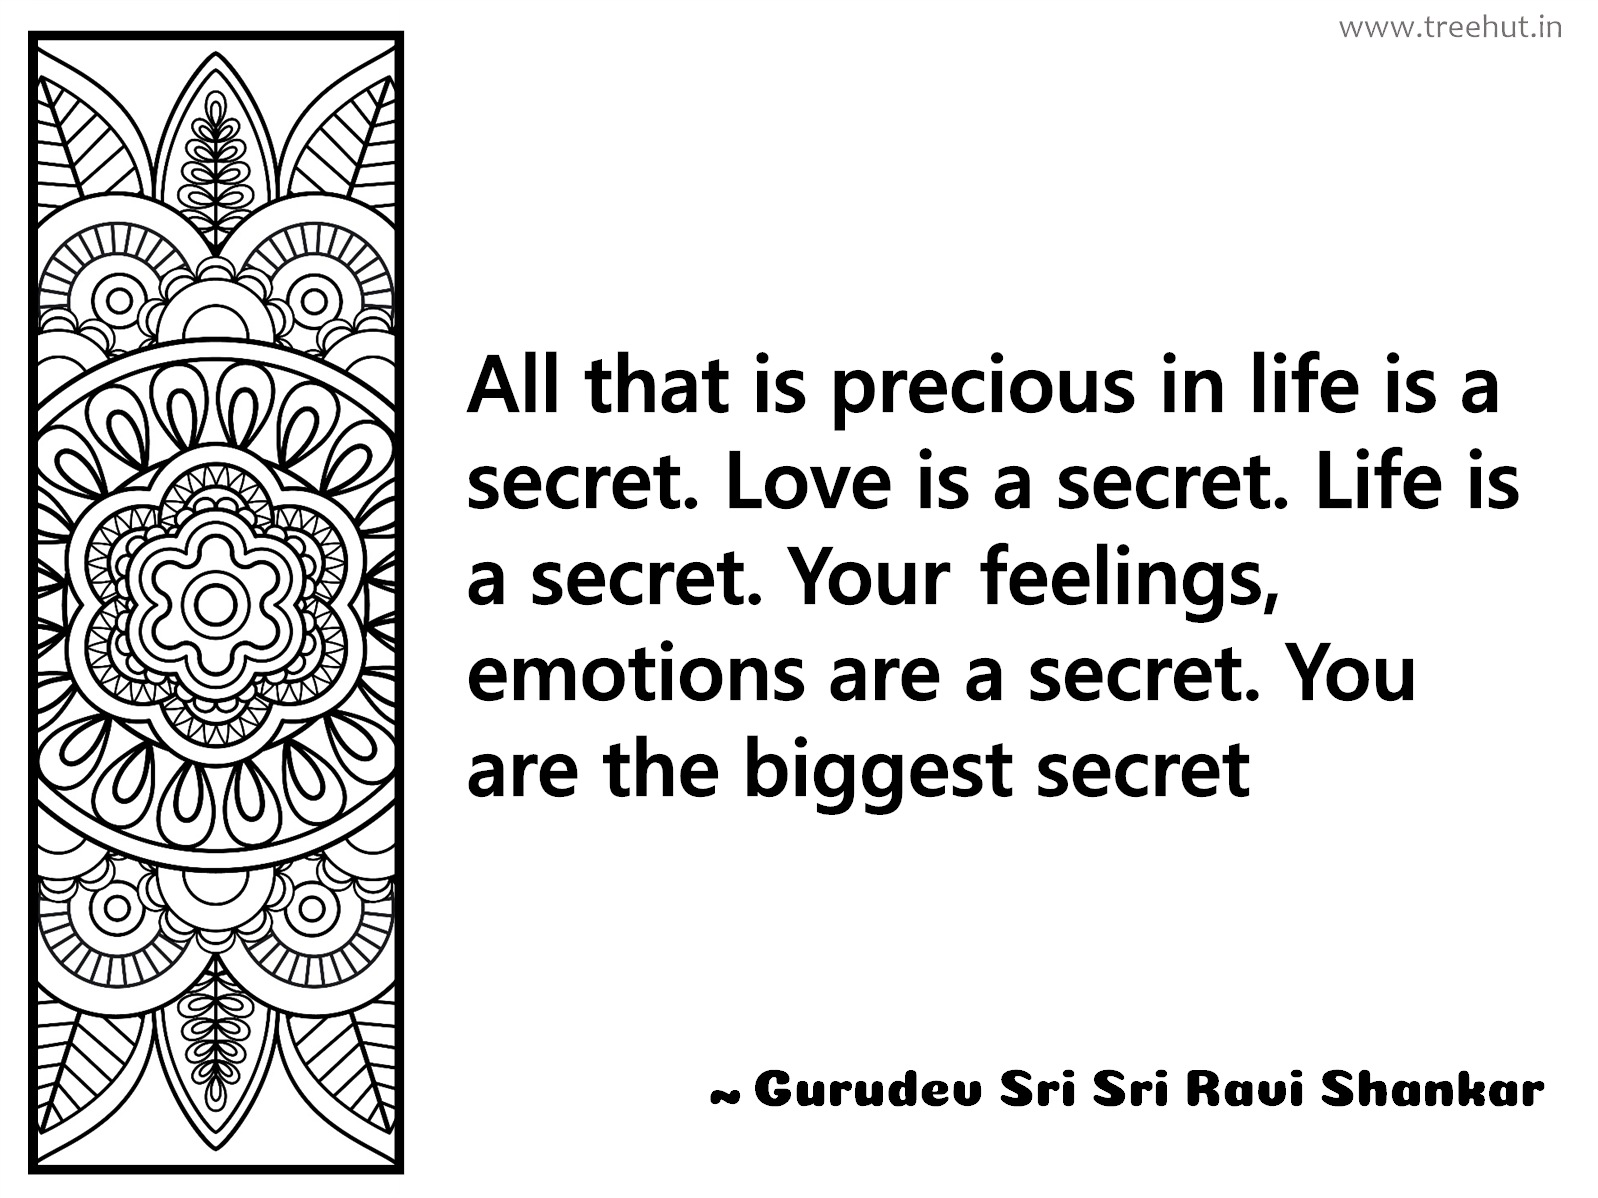 All that is precious in life is a secret. Love is a secret. Life is a secret. Your feelings, emotions are a secret. You are the biggest secret Inspirational Quote by Gurudev Sri Sri Ravi Shankar, coloring pages